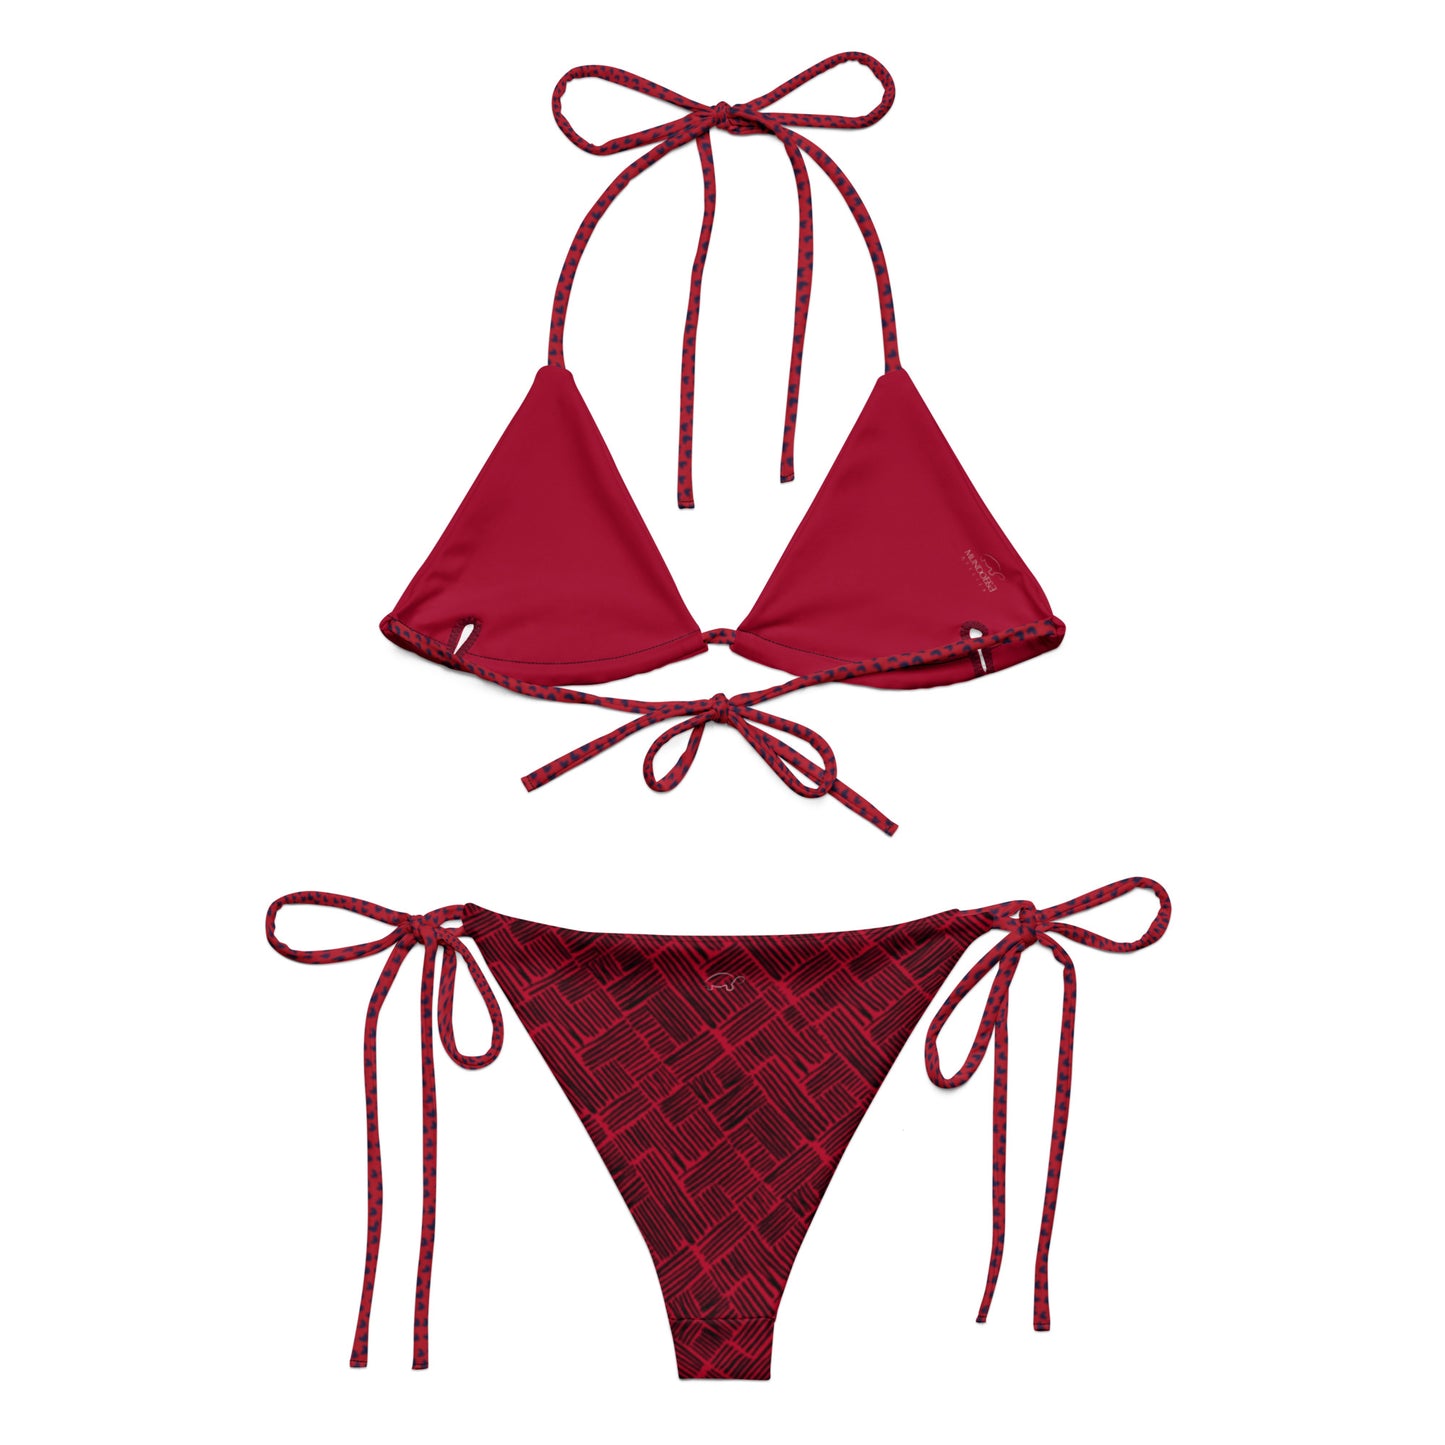 Caracas Collection Red recycled string bikini. Design hand-painted by the Designer Maria Alejandra Echenique